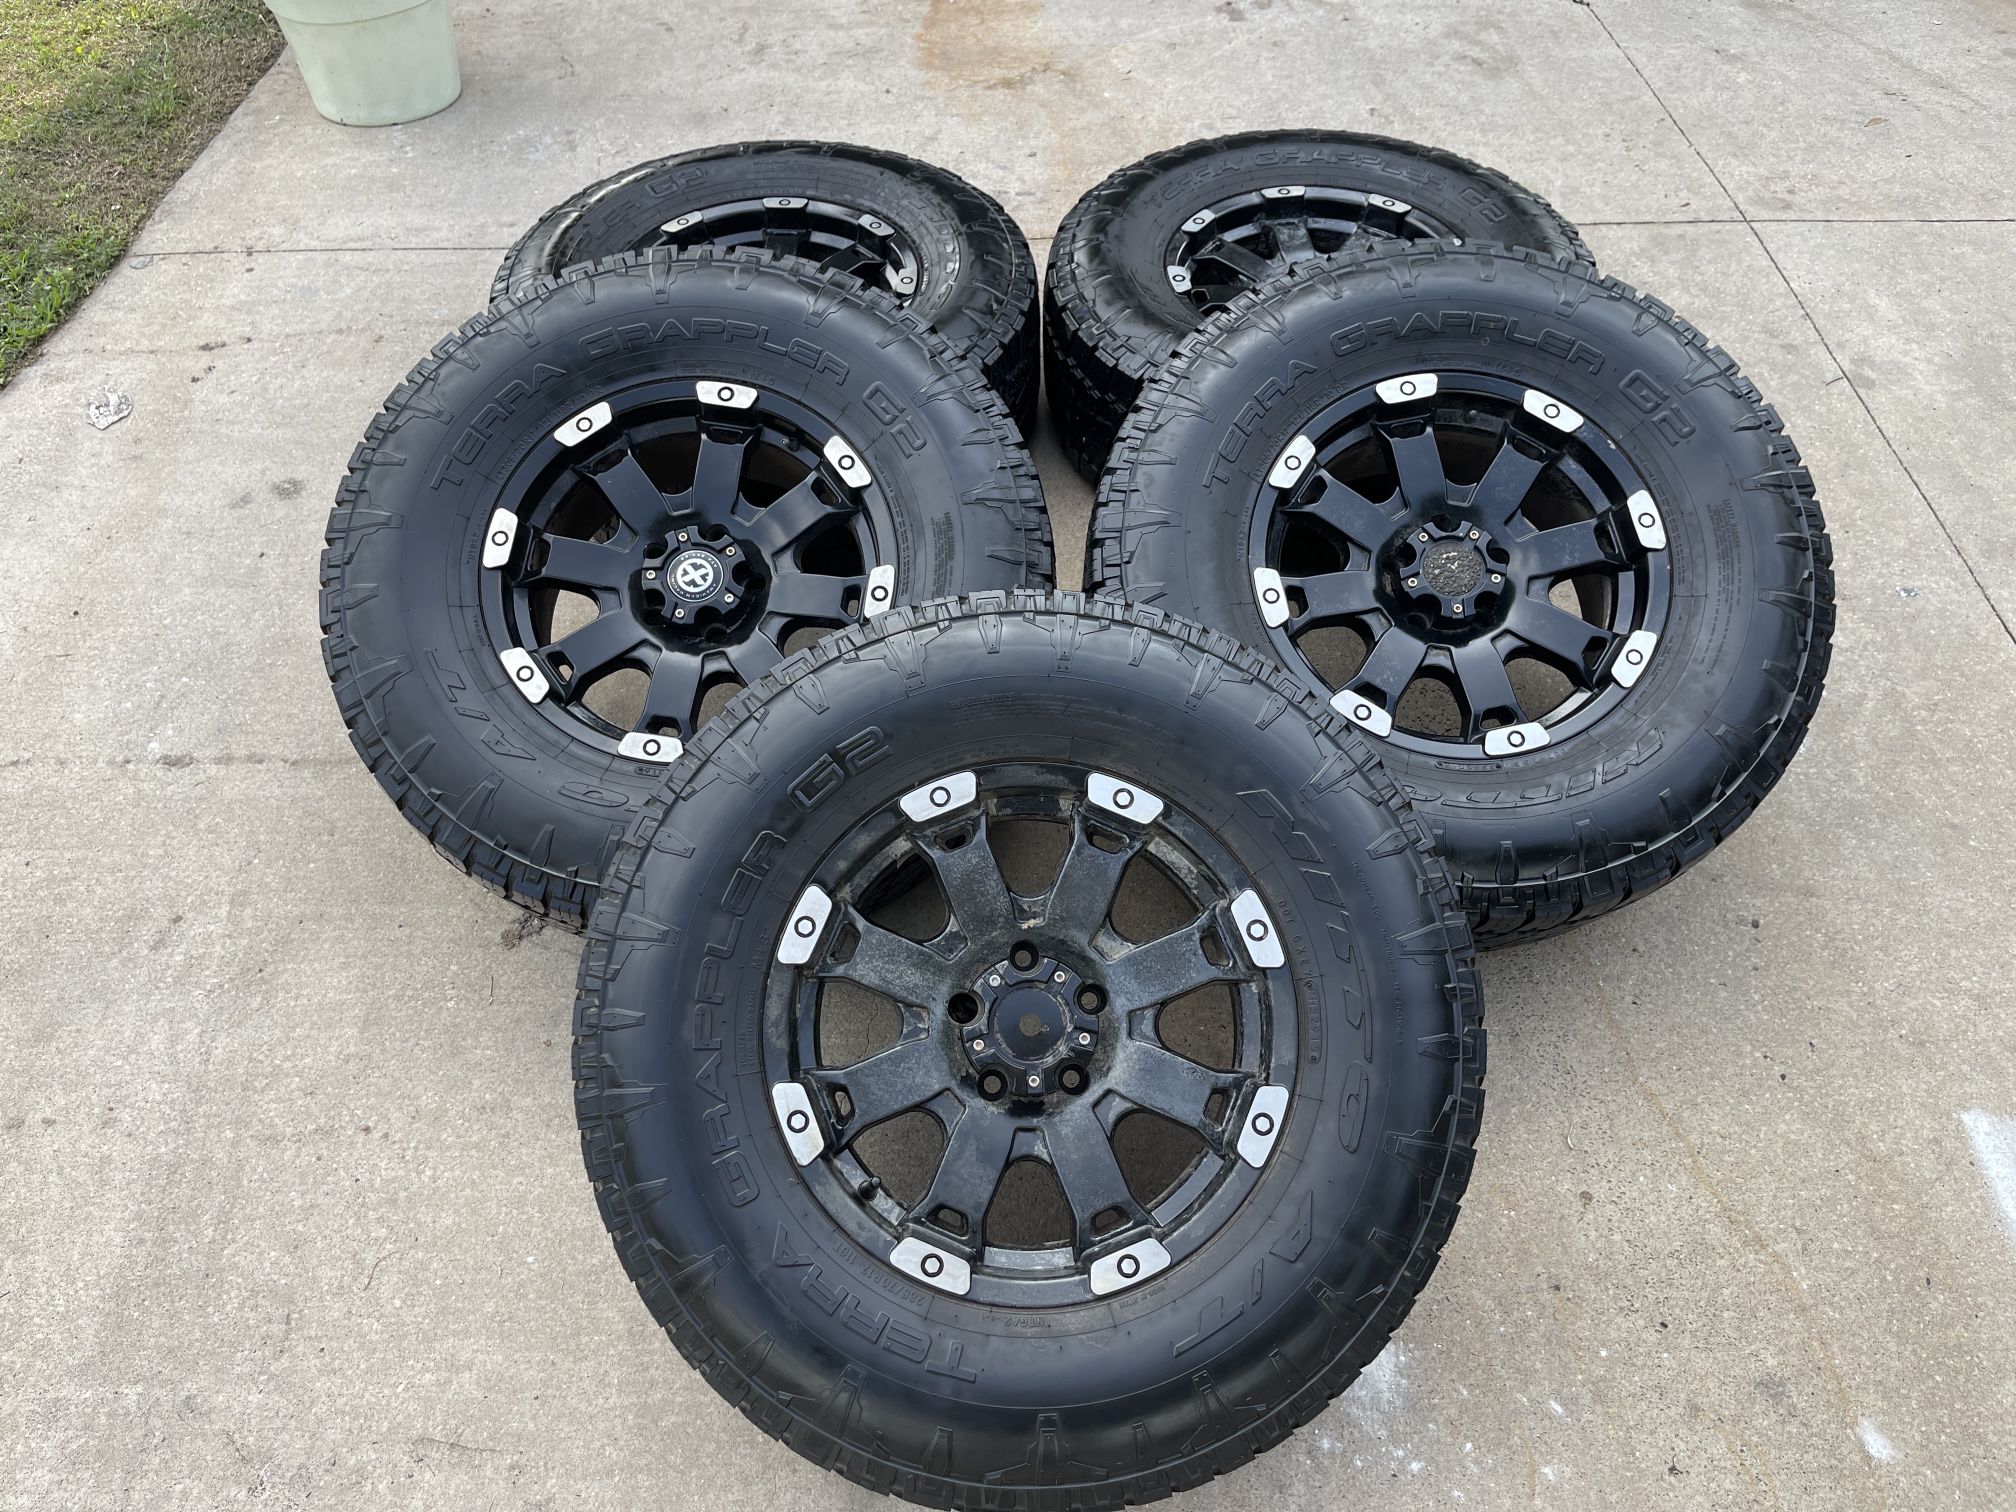 18” Jeep Wrangler Wheels W/Matching Spare